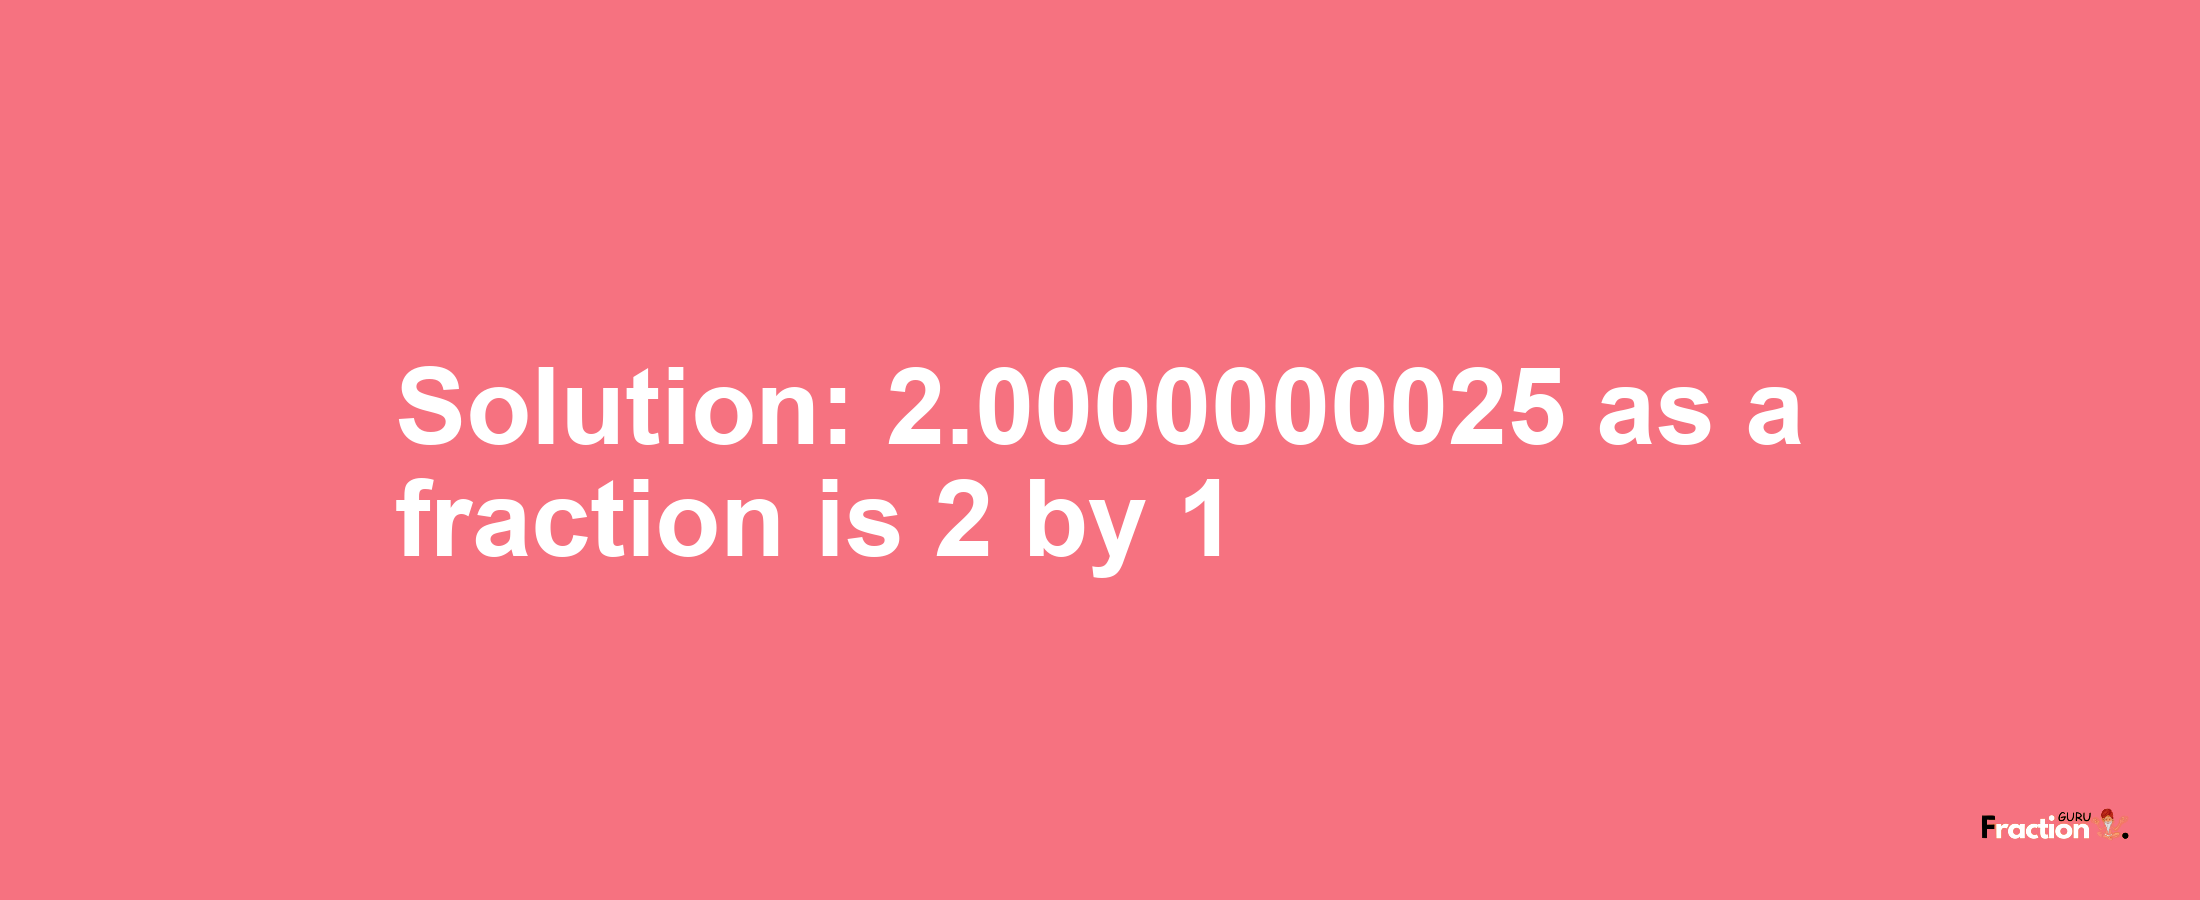 Solution:2.0000000025 as a fraction is 2/1